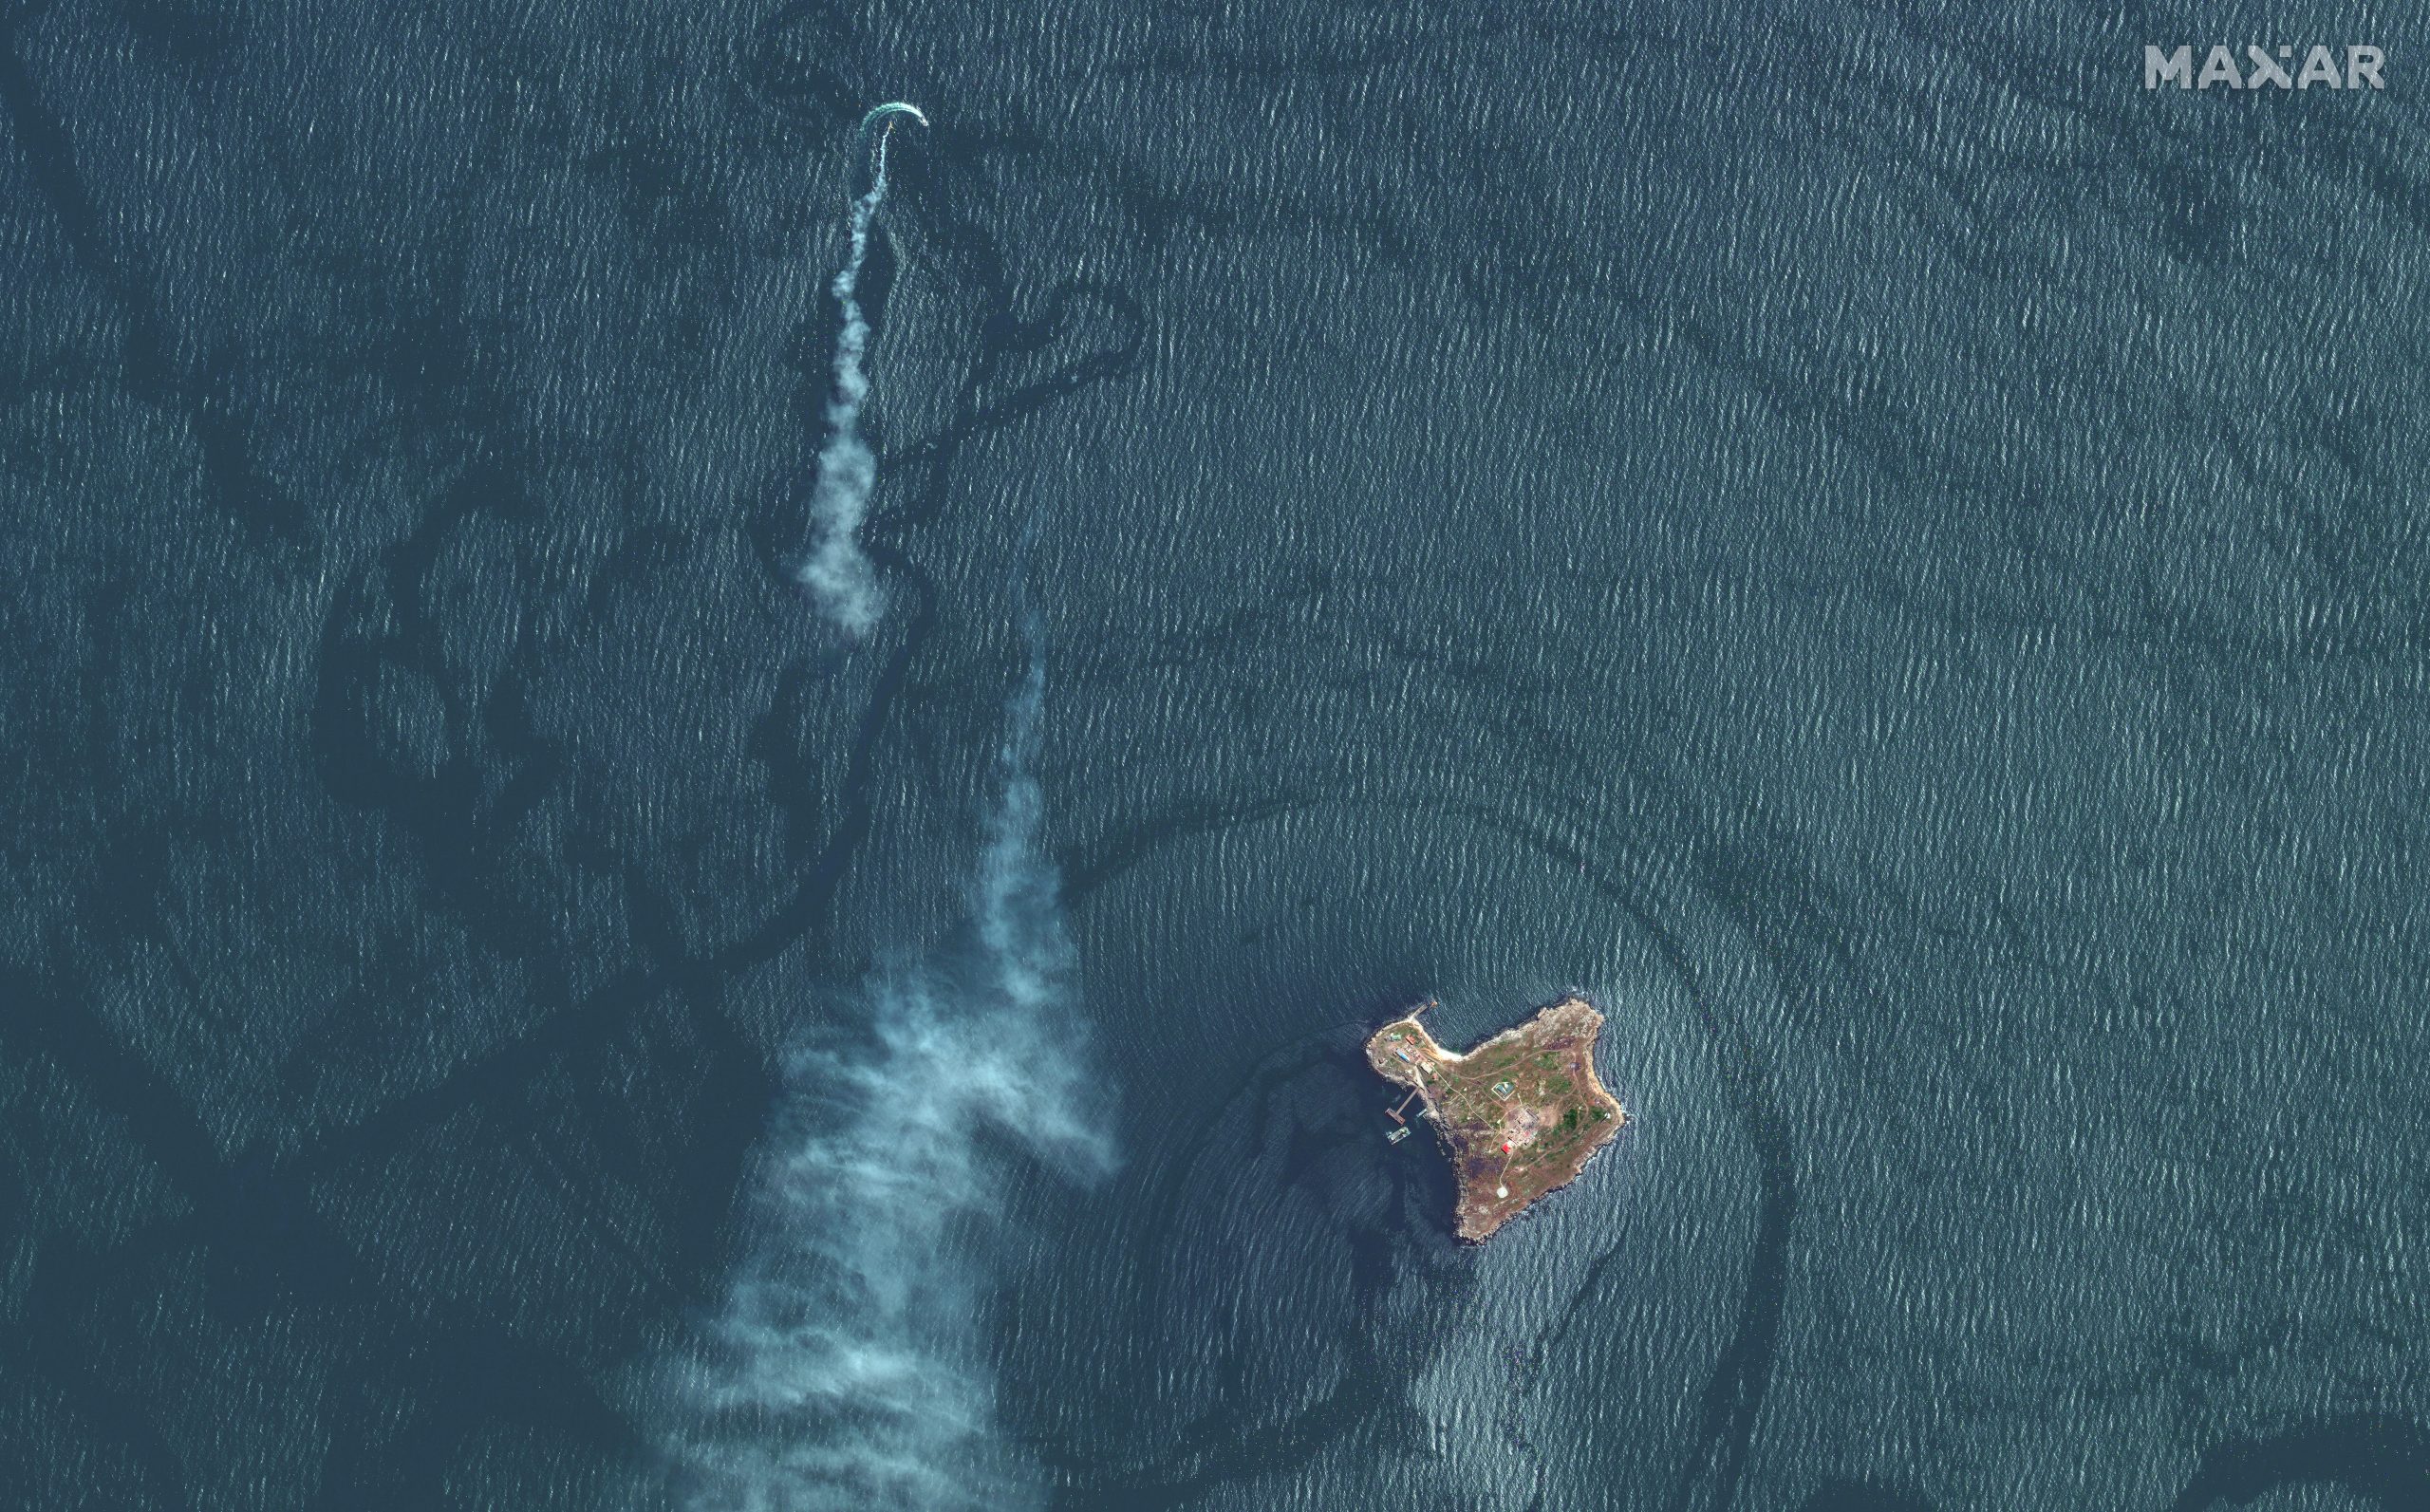 Shown from above are Snake Island and an attack on Russian landing craft.